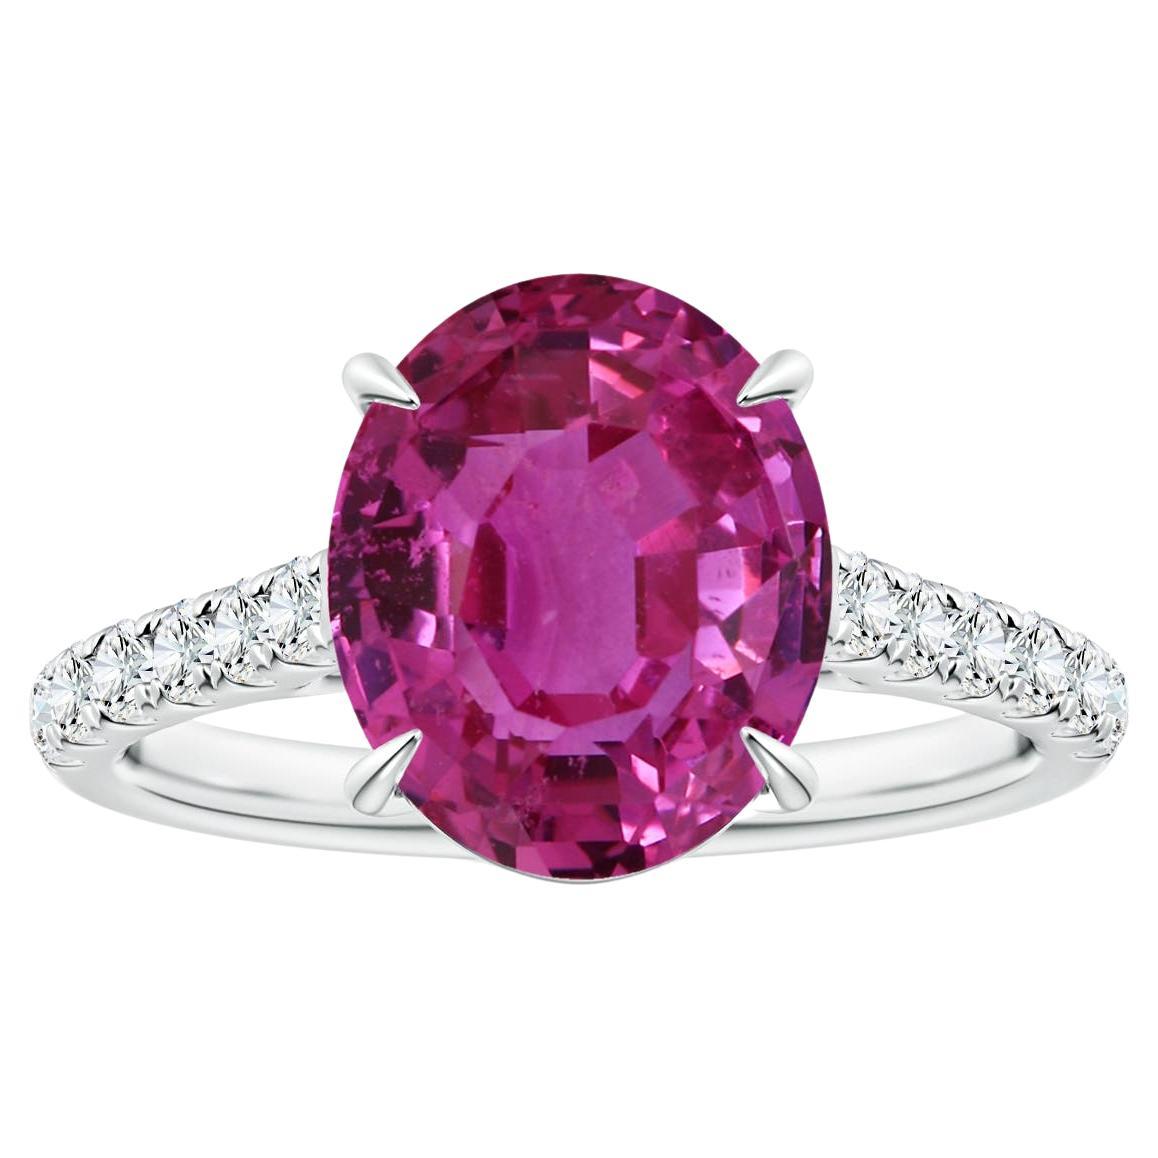 ANGARA Claw-Set GIA Certified Oval Pink Sapphire White Gold Ring with Diamonds